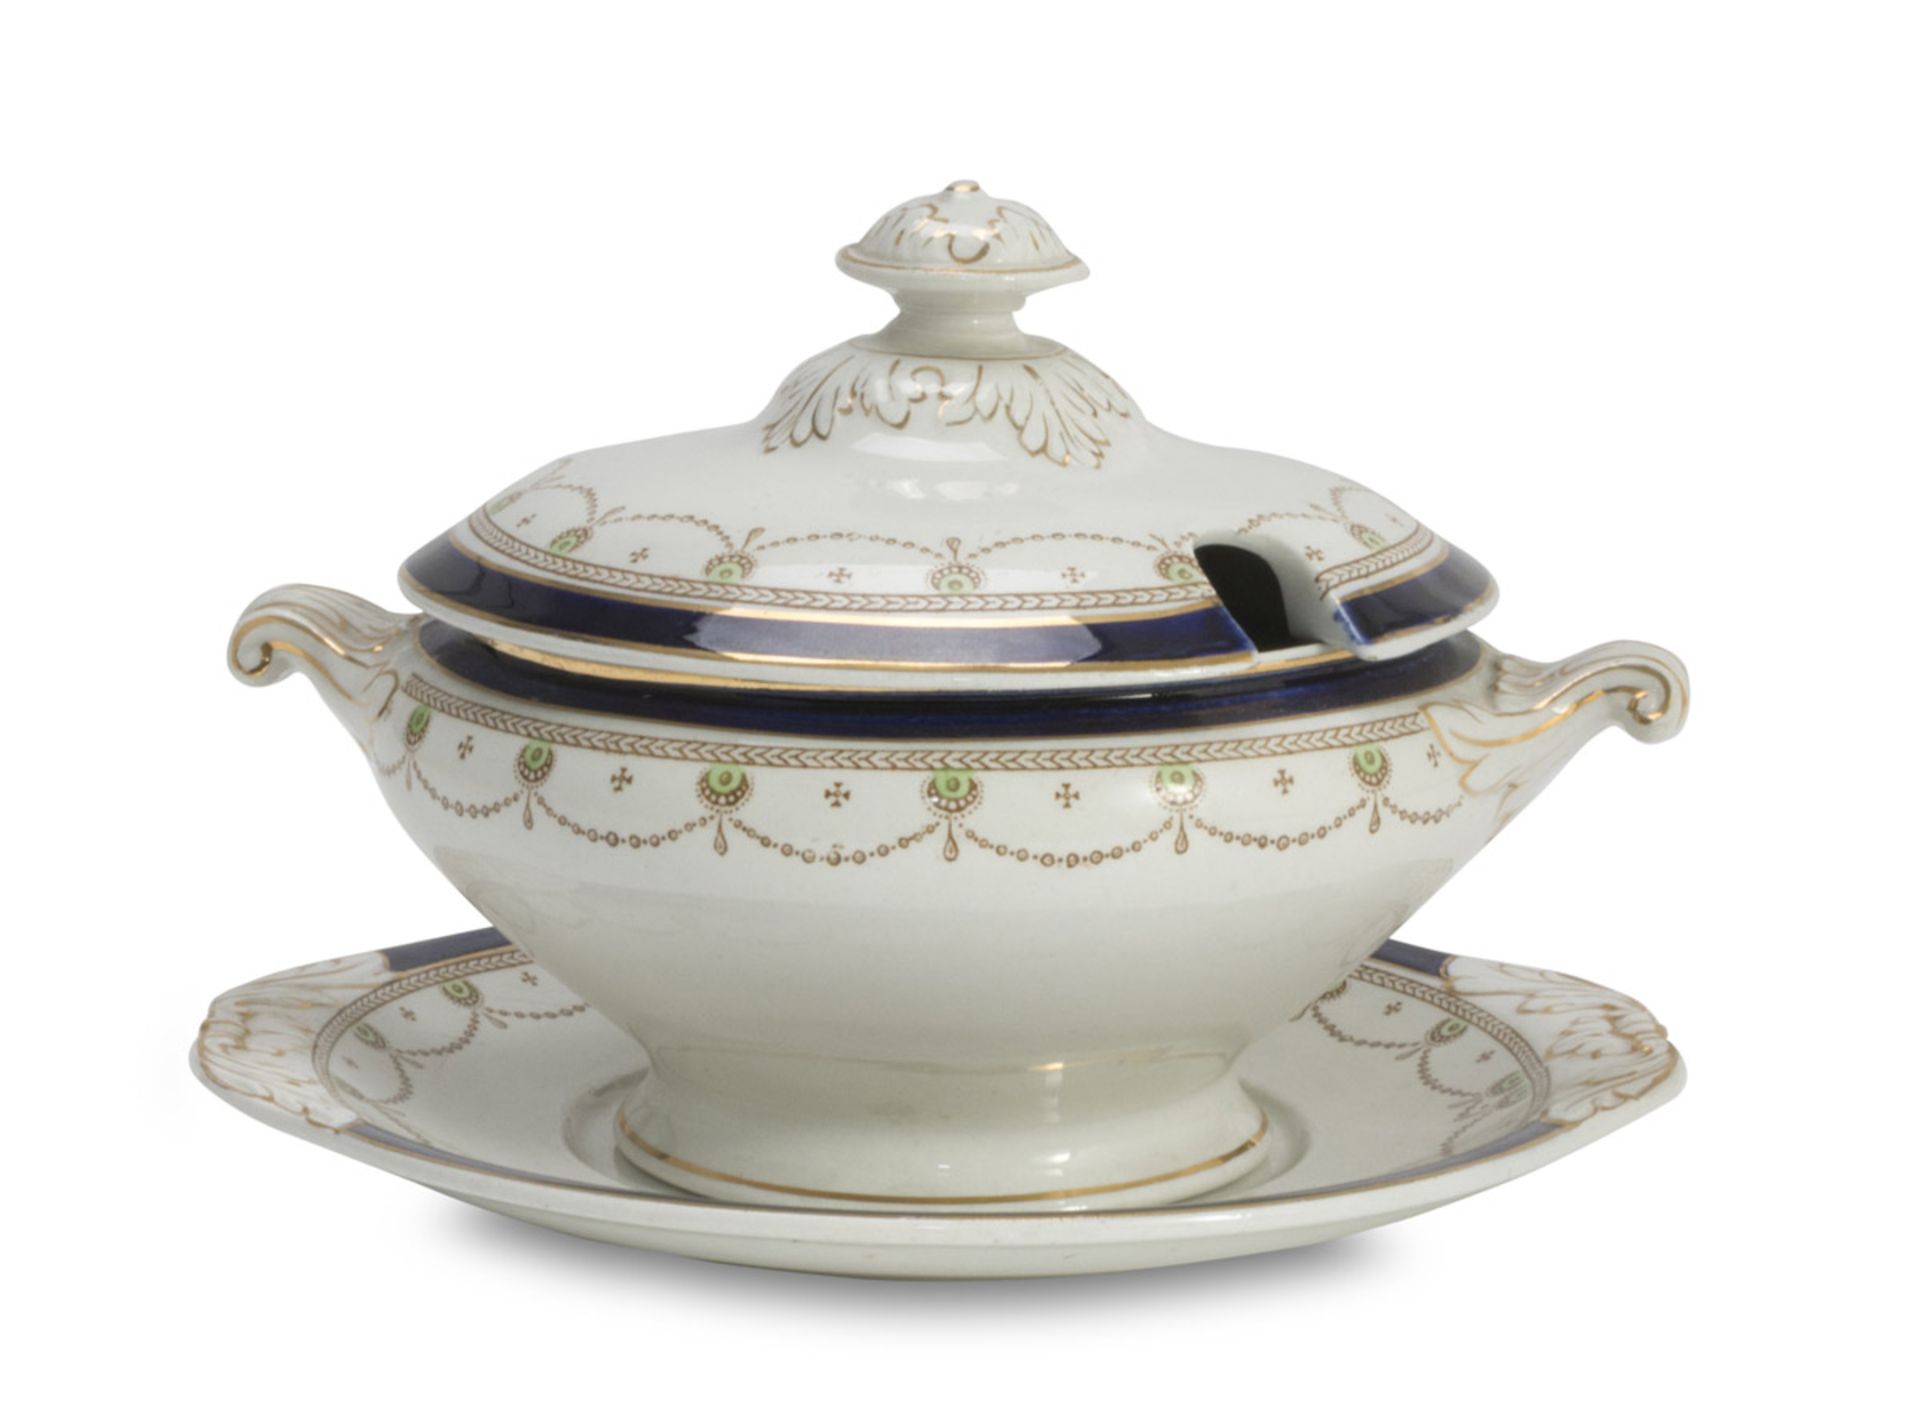 MIGNON TUREEN IN CERAMICS, ENGLAND LATE 19TH CENTURY in white, cobalt and gold enamel, decorated